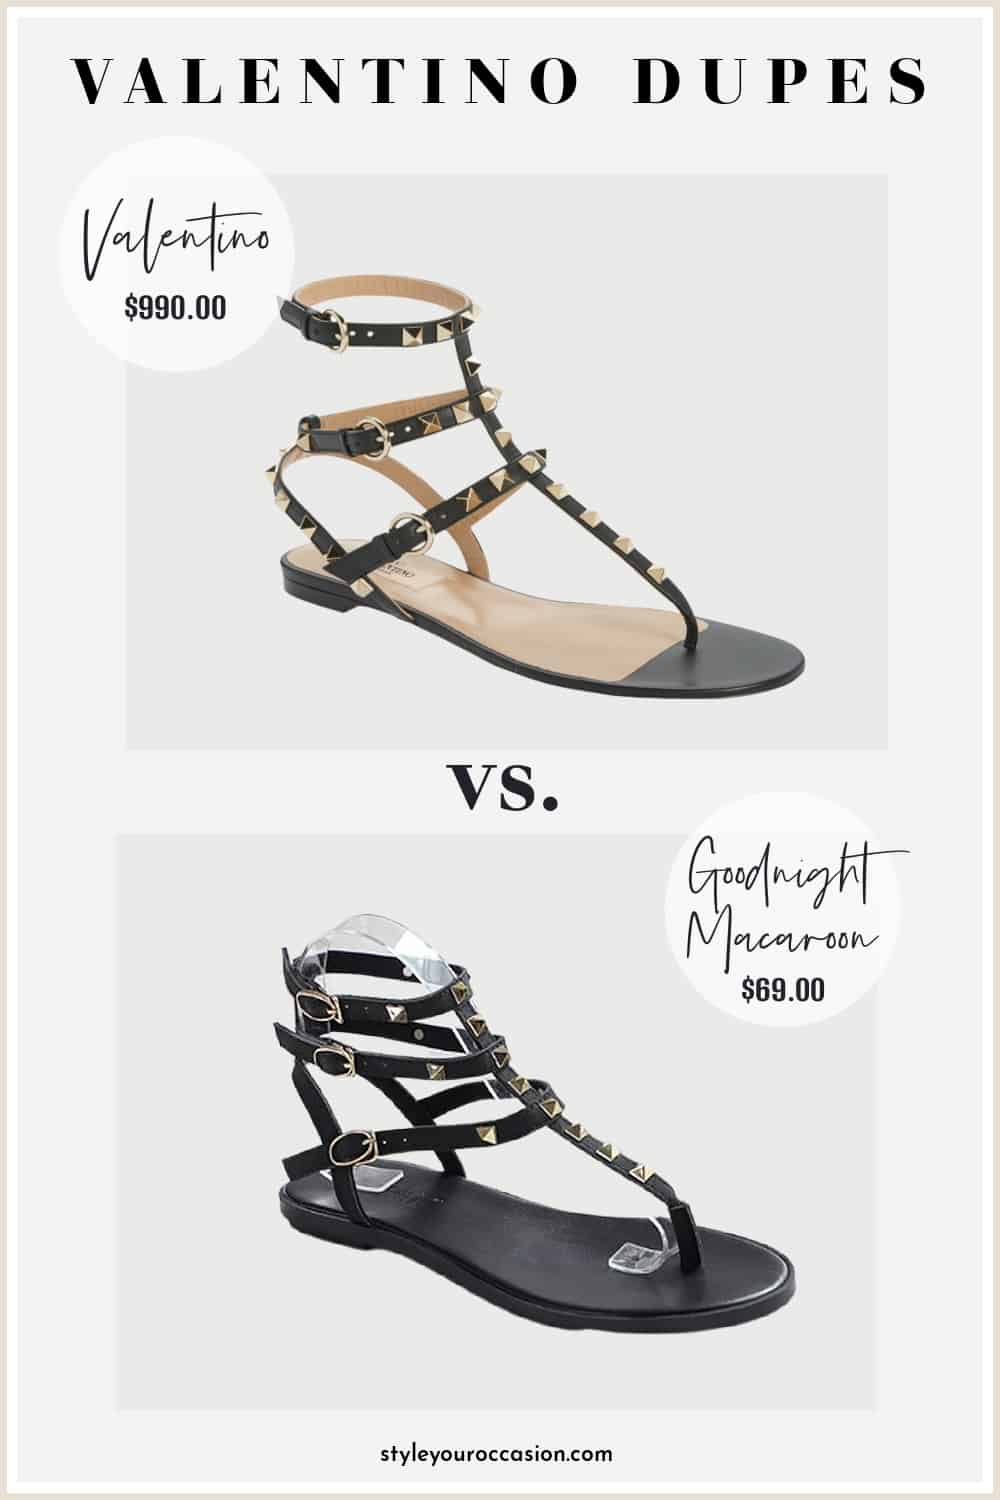 image of a Valentino rockstud cage sandal in black and a dupe sandal that looks very similar